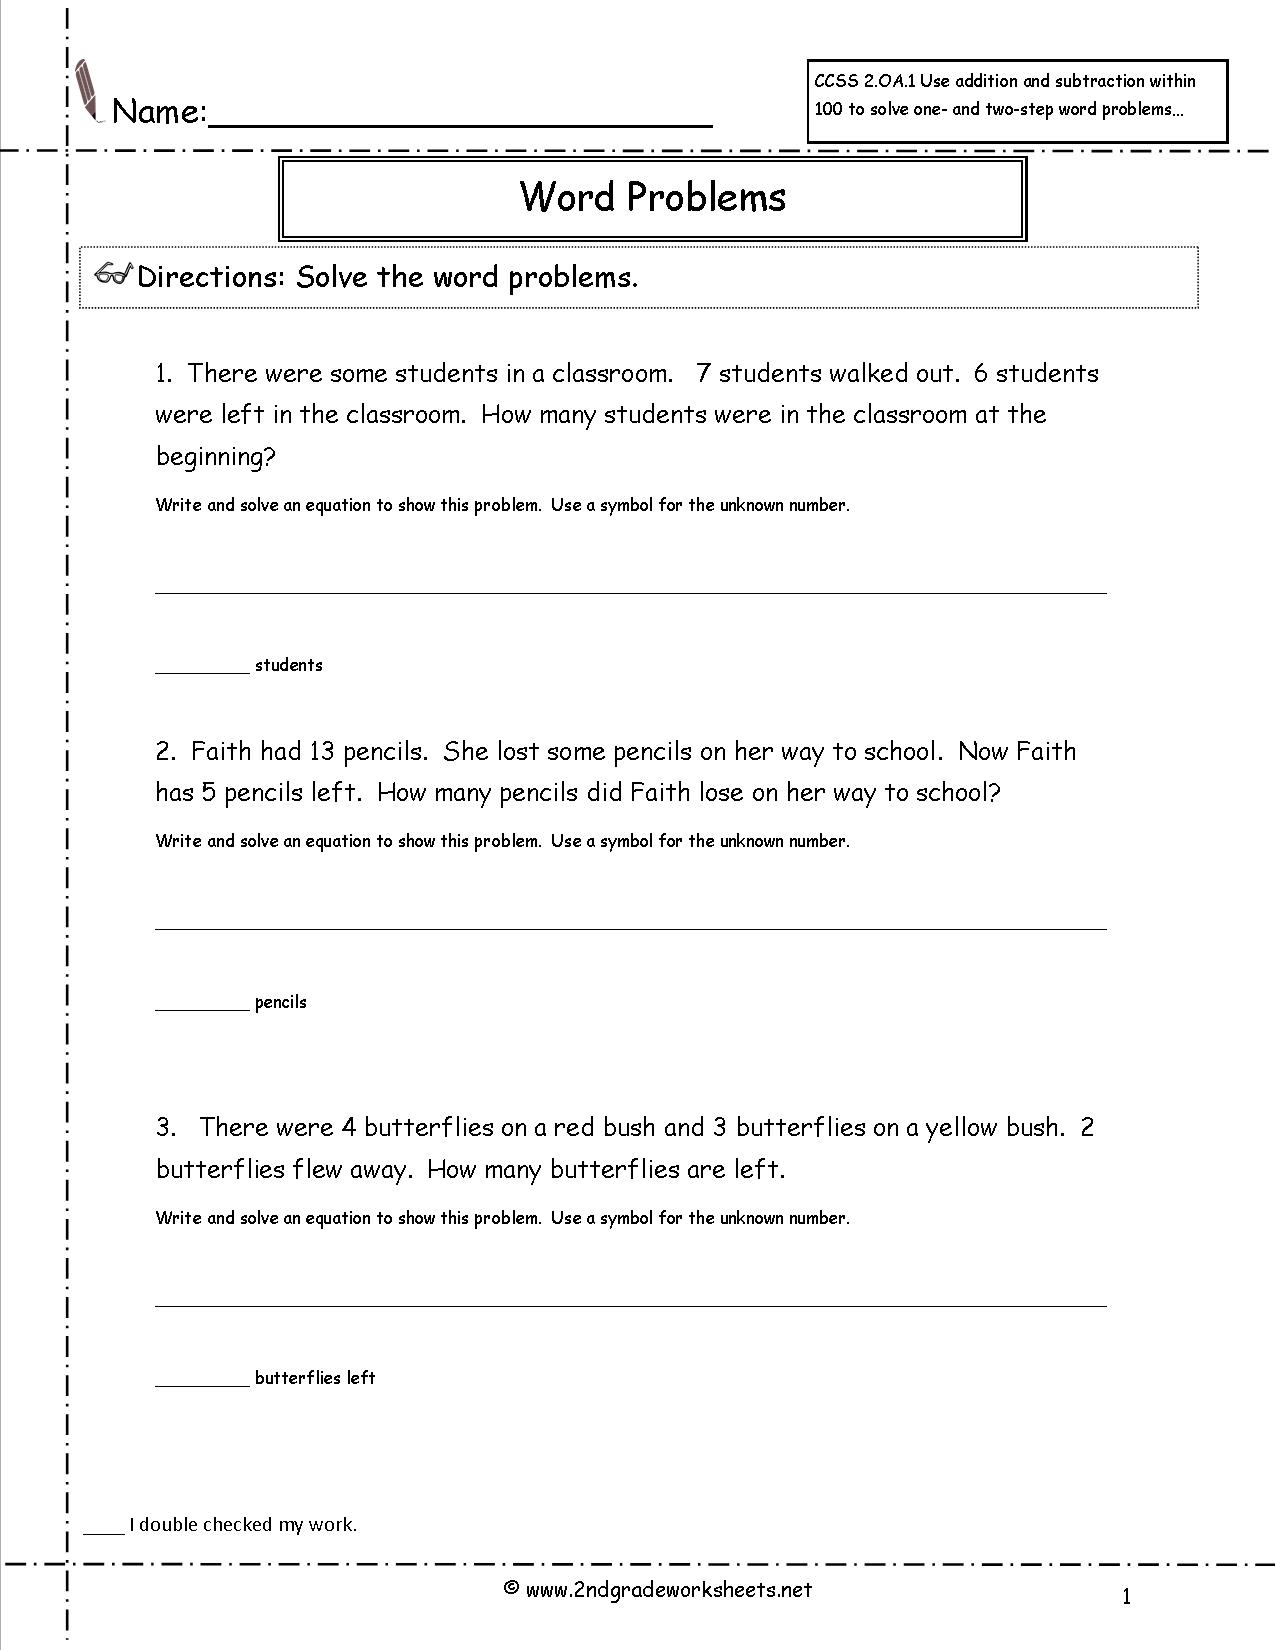 14 Best Images of Subtraction Worksheets Within 100 - 2-Digit Addition